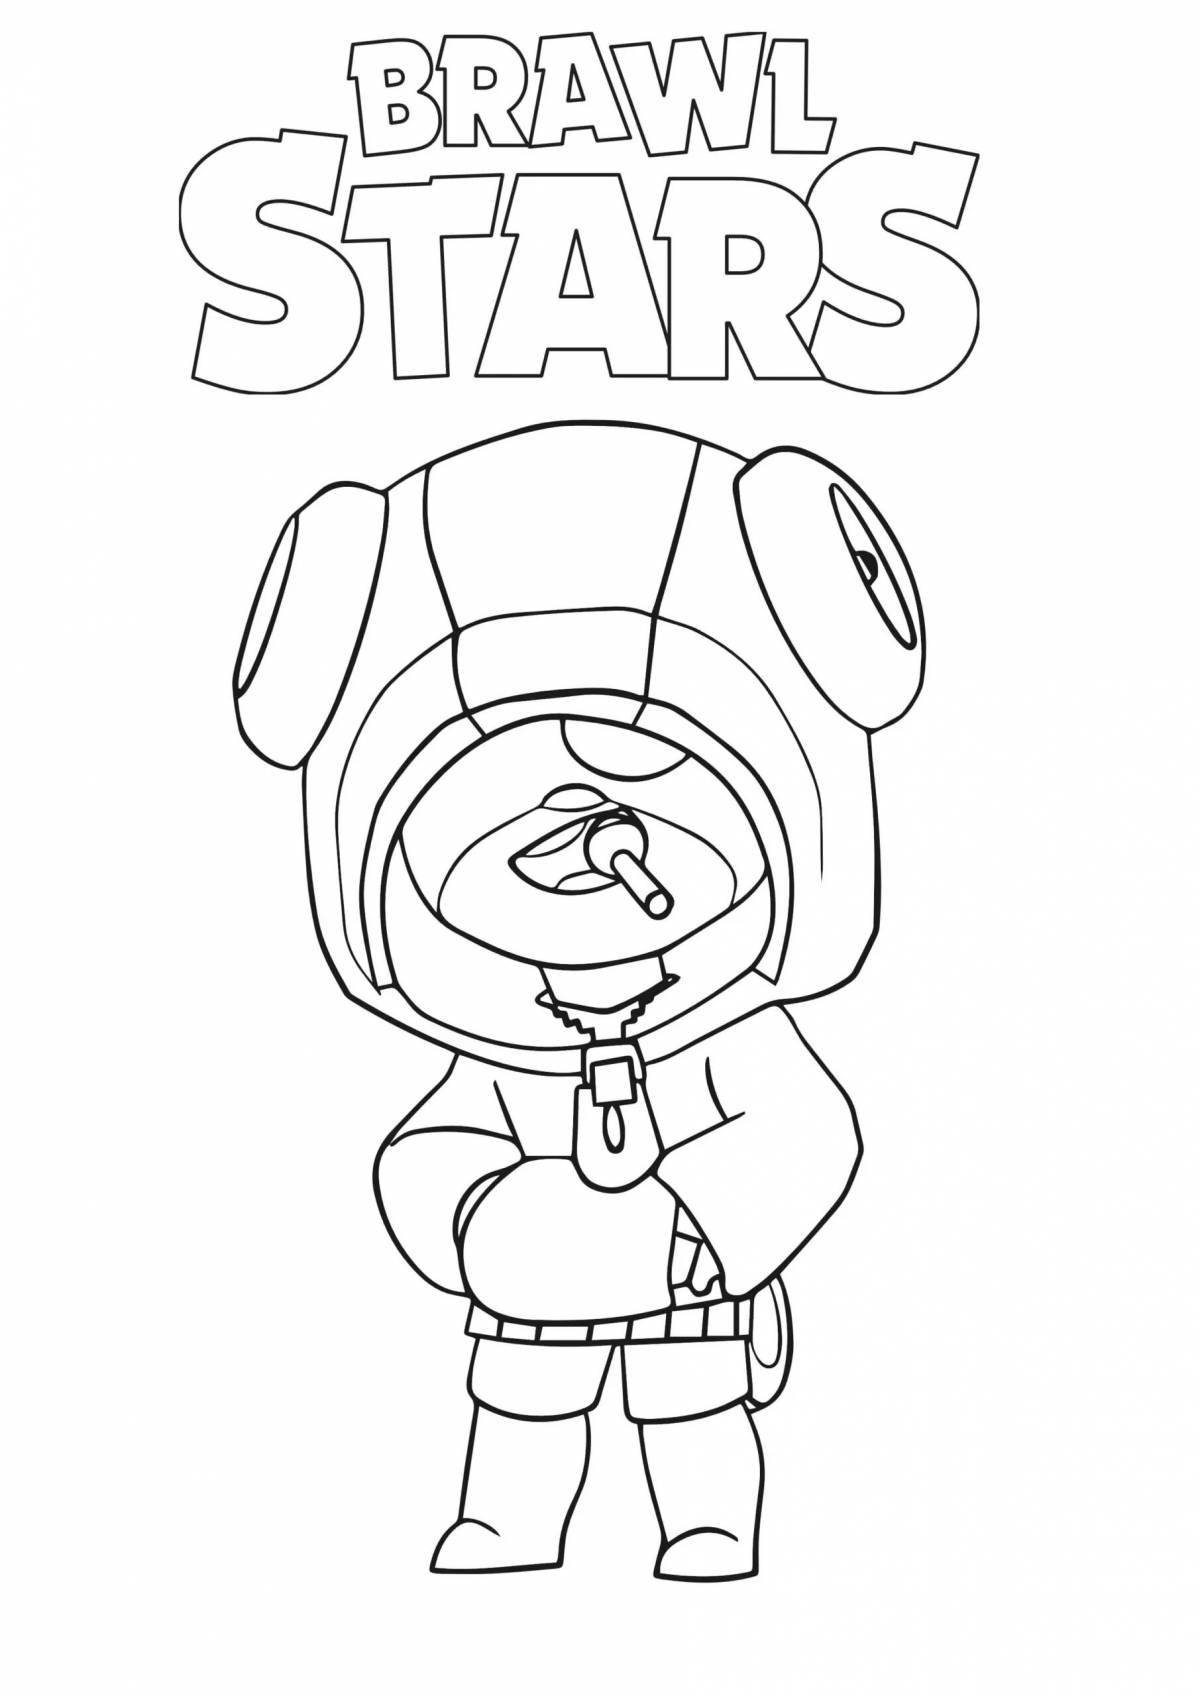 Fairy brawl stars coloring page